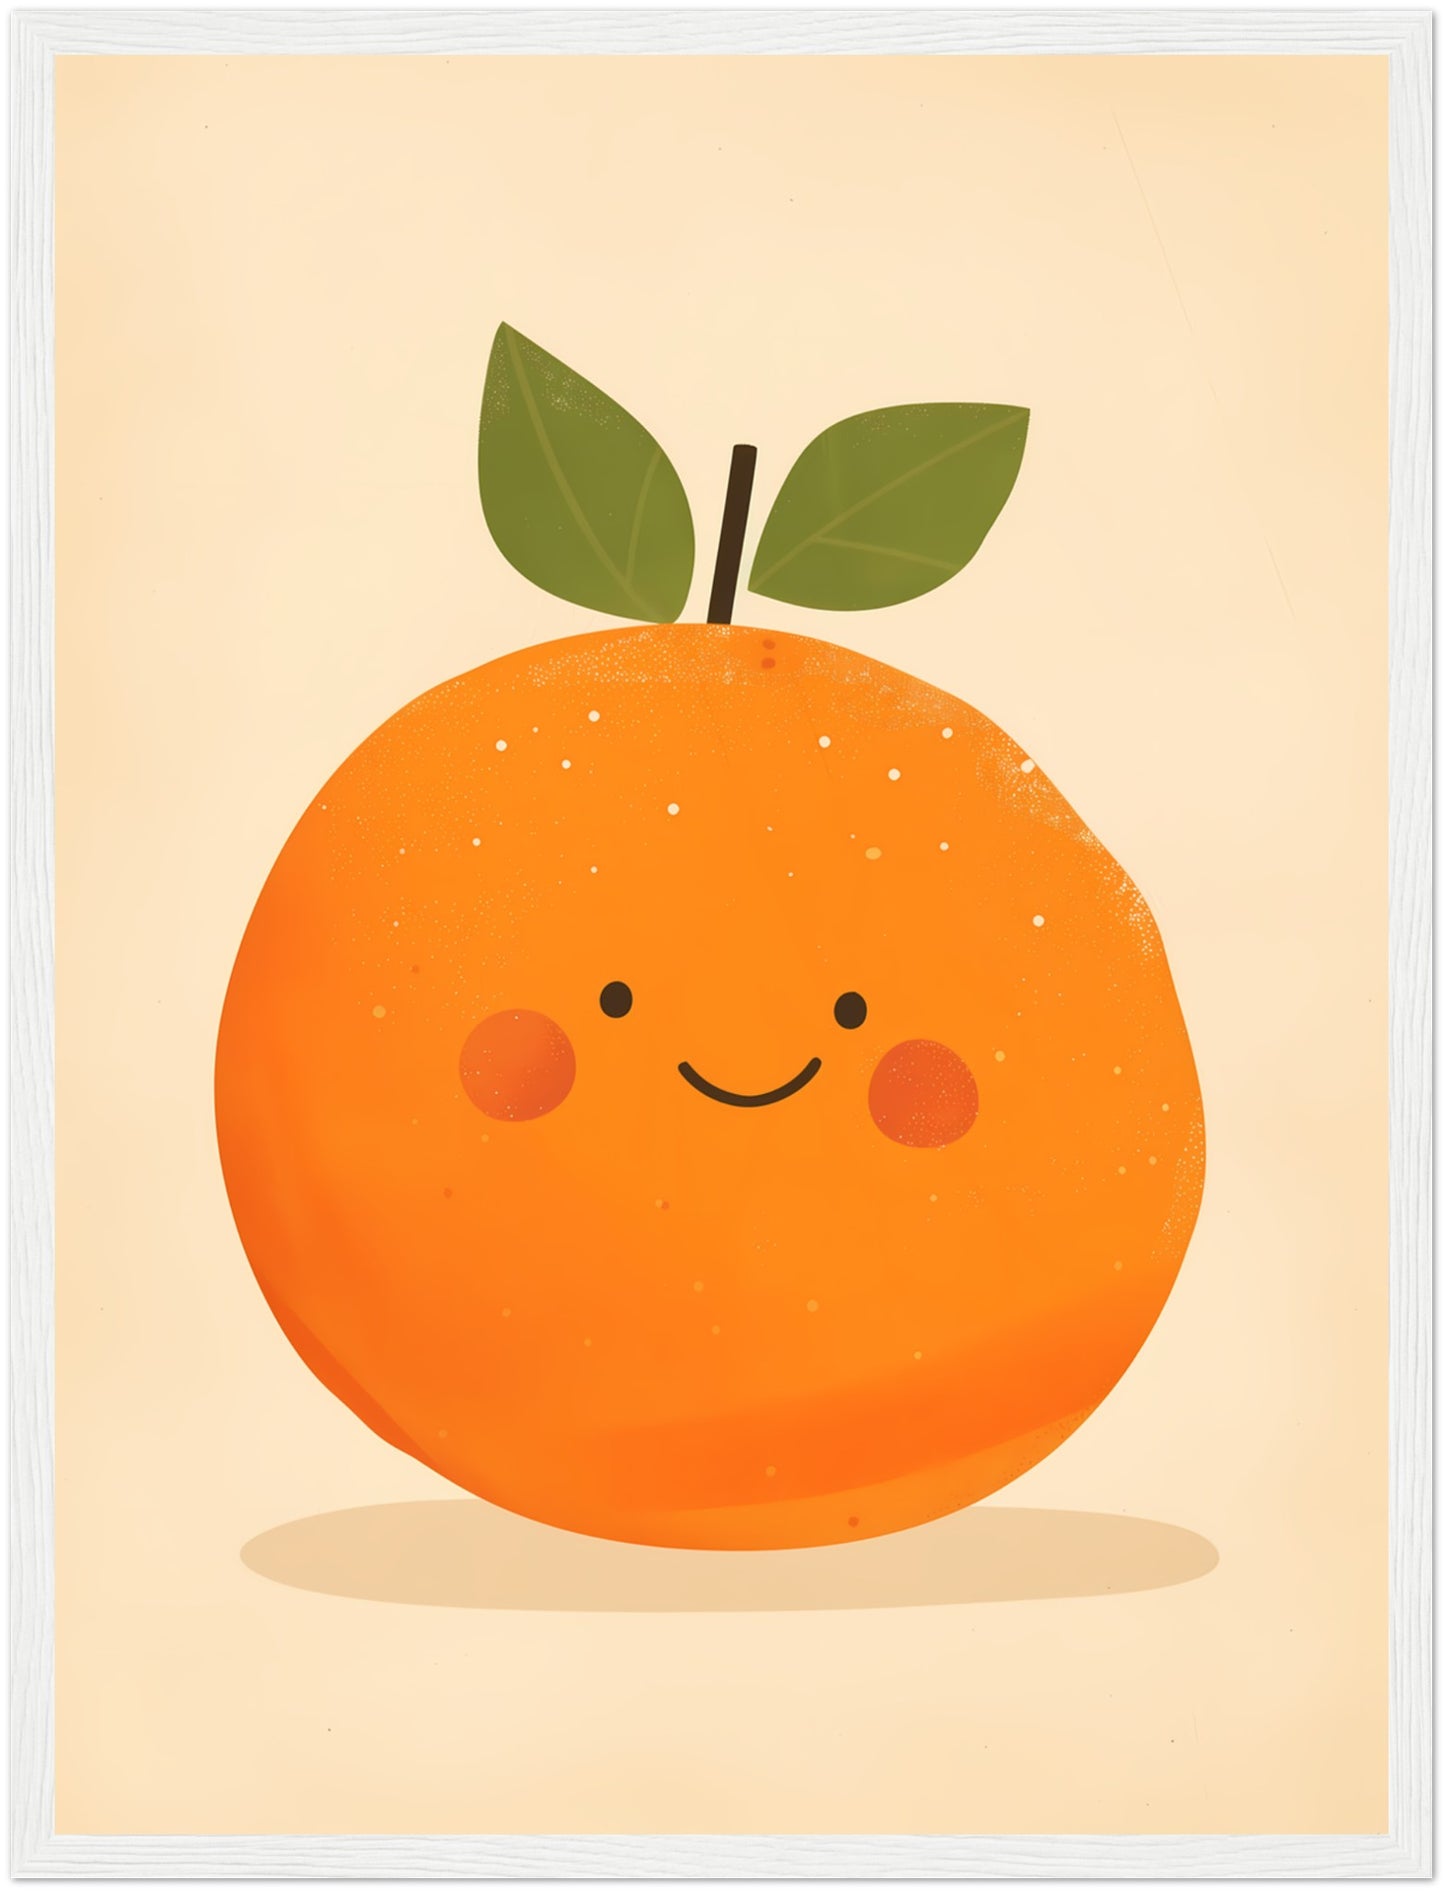 Illustration of a cute smiling orange with leaves in a frame.